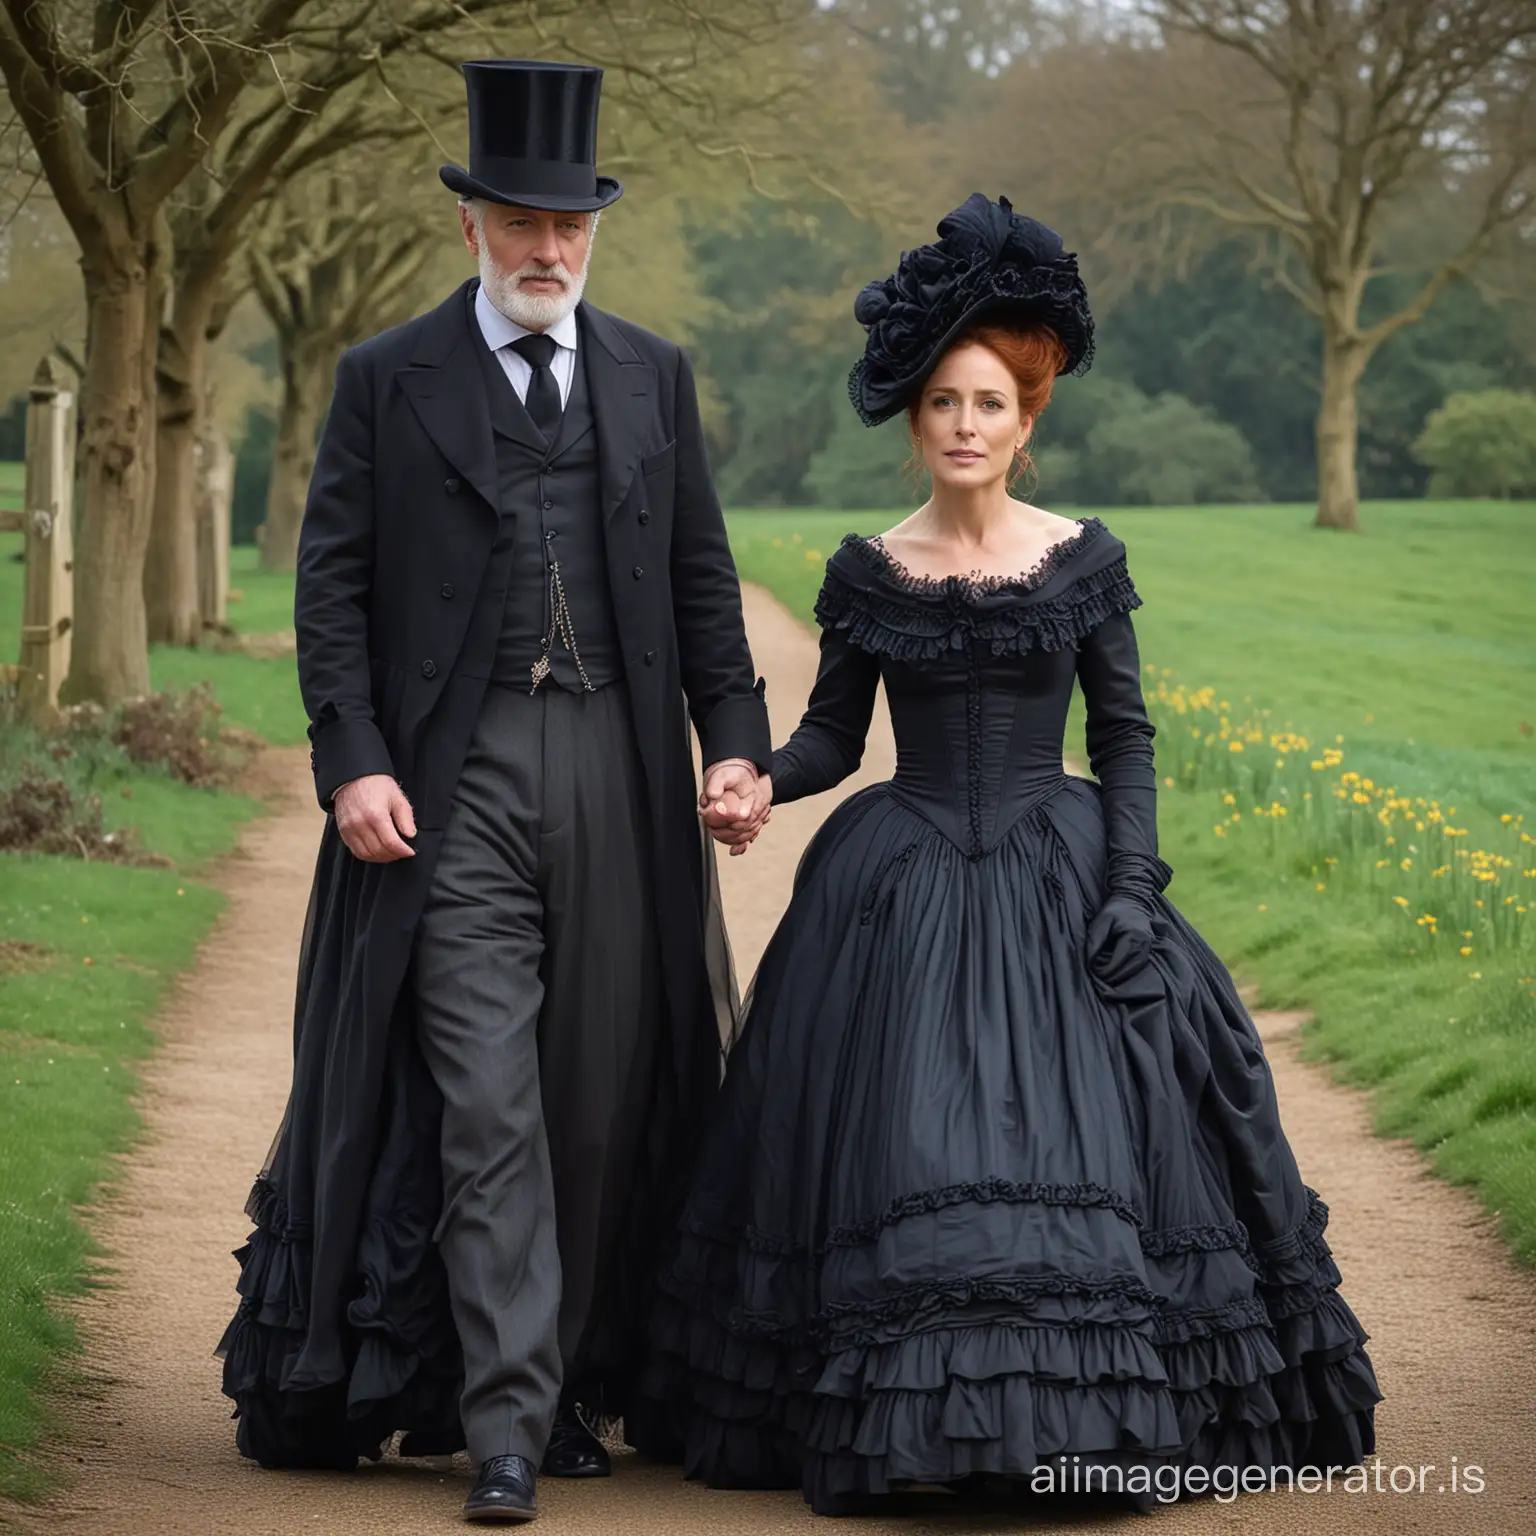 red hair Gillian Anderson wearing a dark navy floor-length loose billowing 1860 victorian crinoline poofy dress with a frilly bonnet walking with an old man dressed into a black victorian suit who seems to be her newlywed husband
